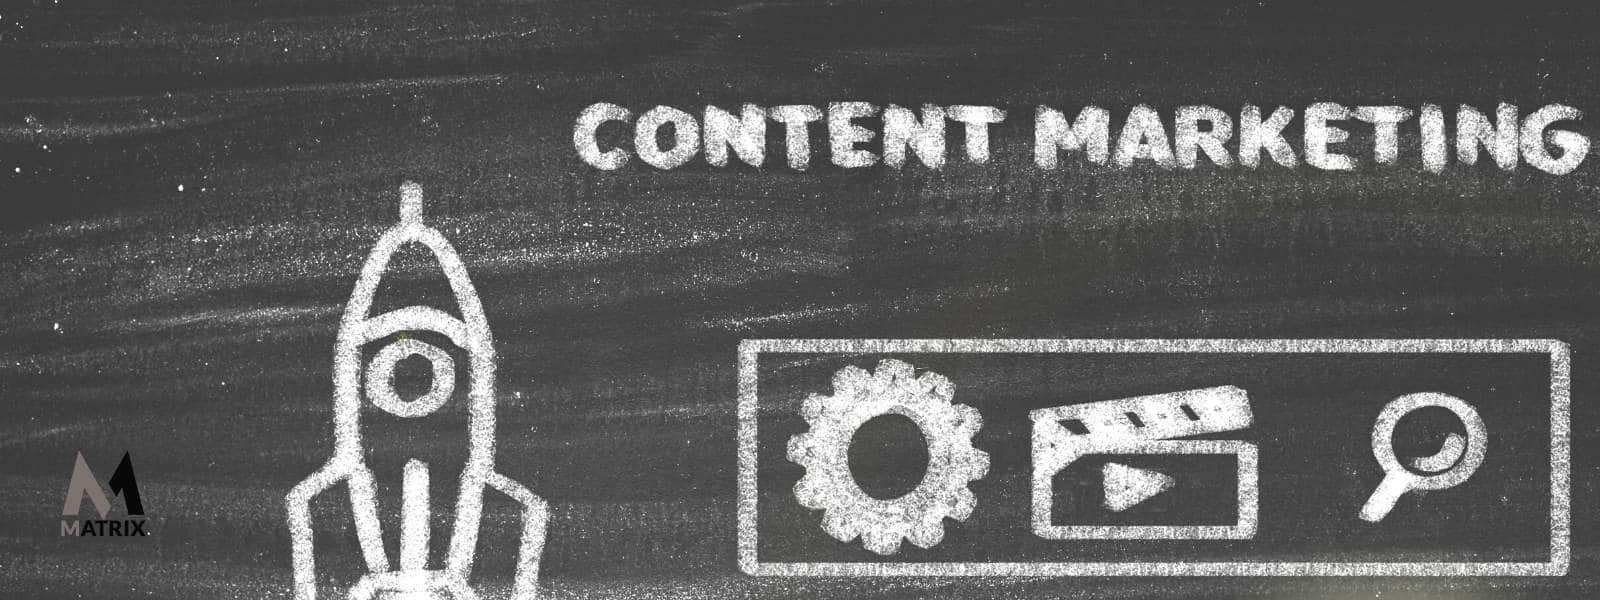 What is content marketing industry about?